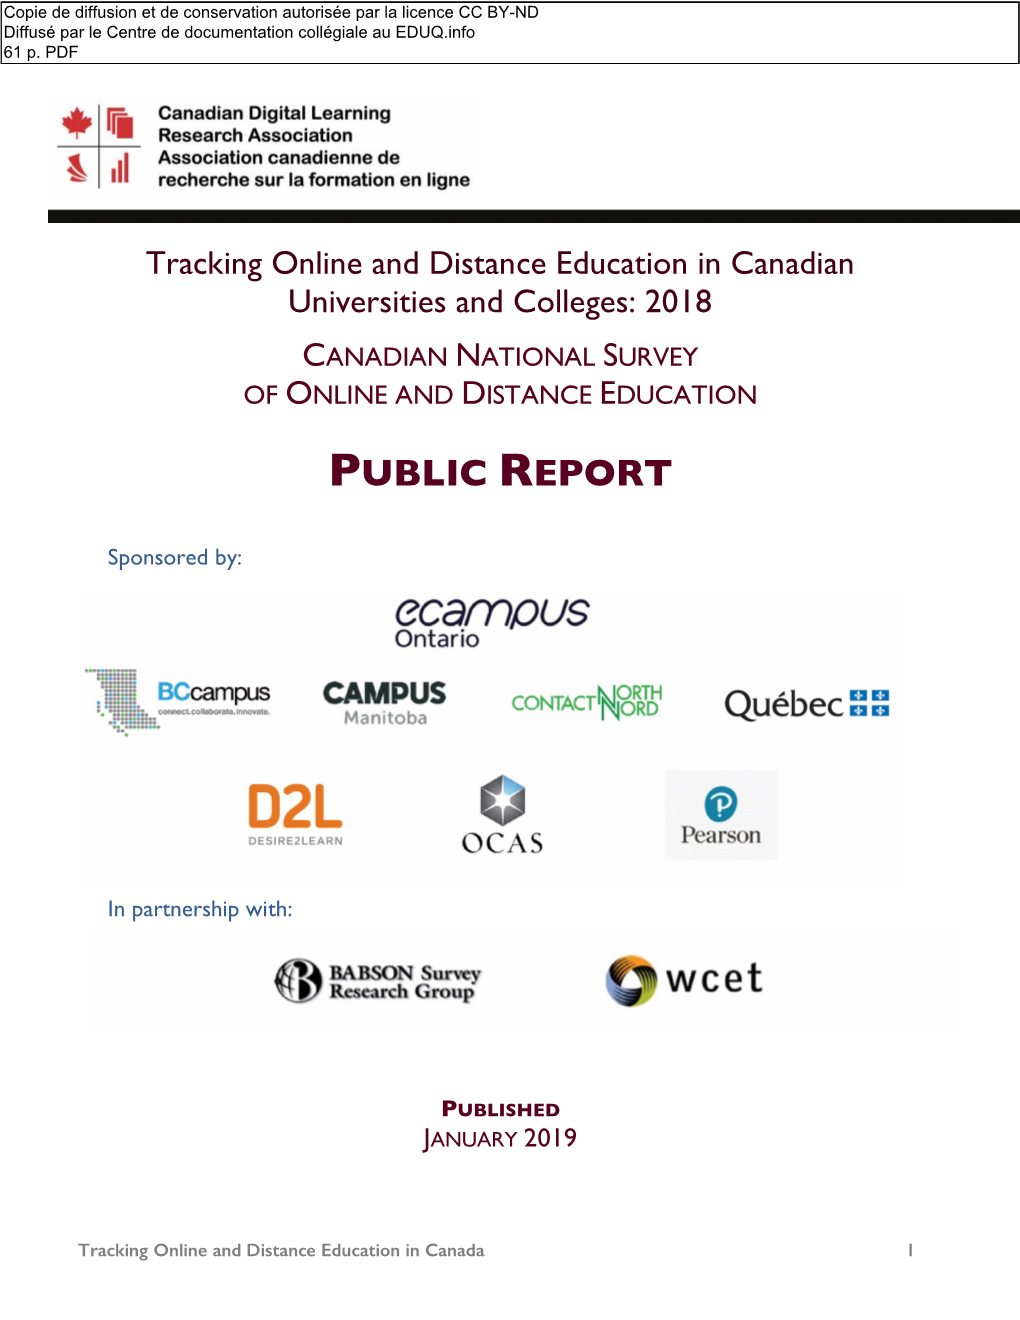 Canadian National Online and Digital Education Survey 2018